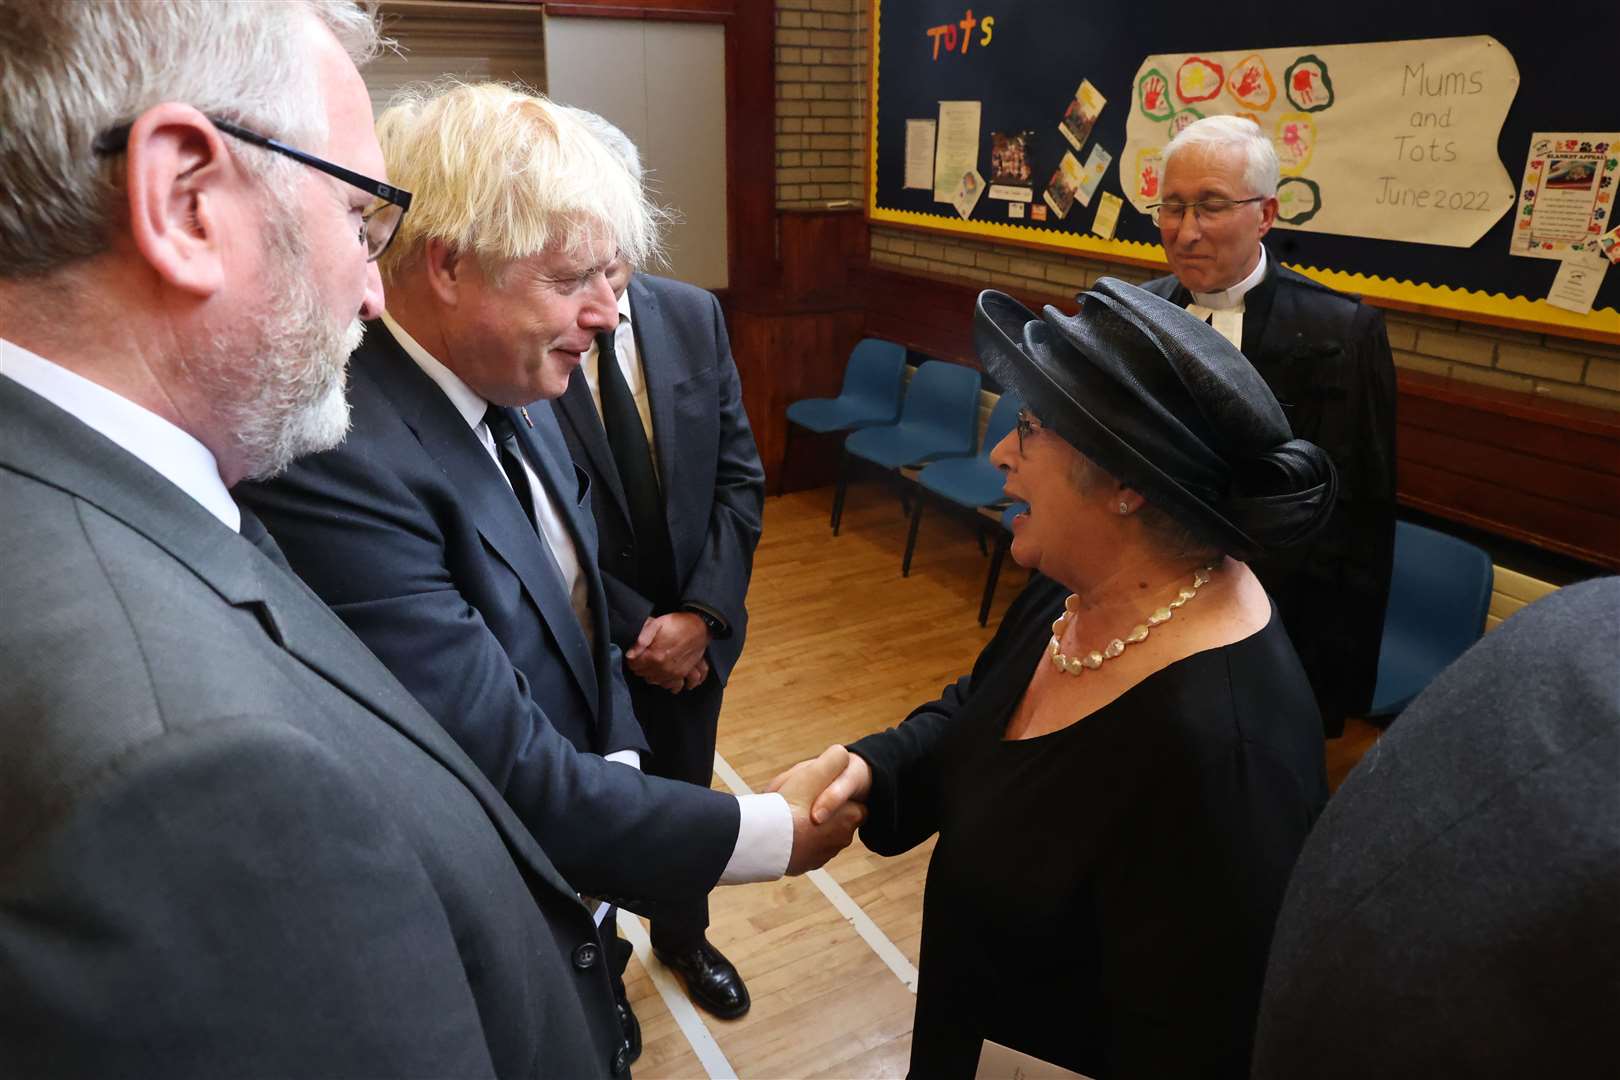 Prime Minister Boris Johnson greets Lady Daphne Trimble after the funeral of former Northern Ireland first minister and UUP leader David Trimble on Monday (Liam McBurney/PA)